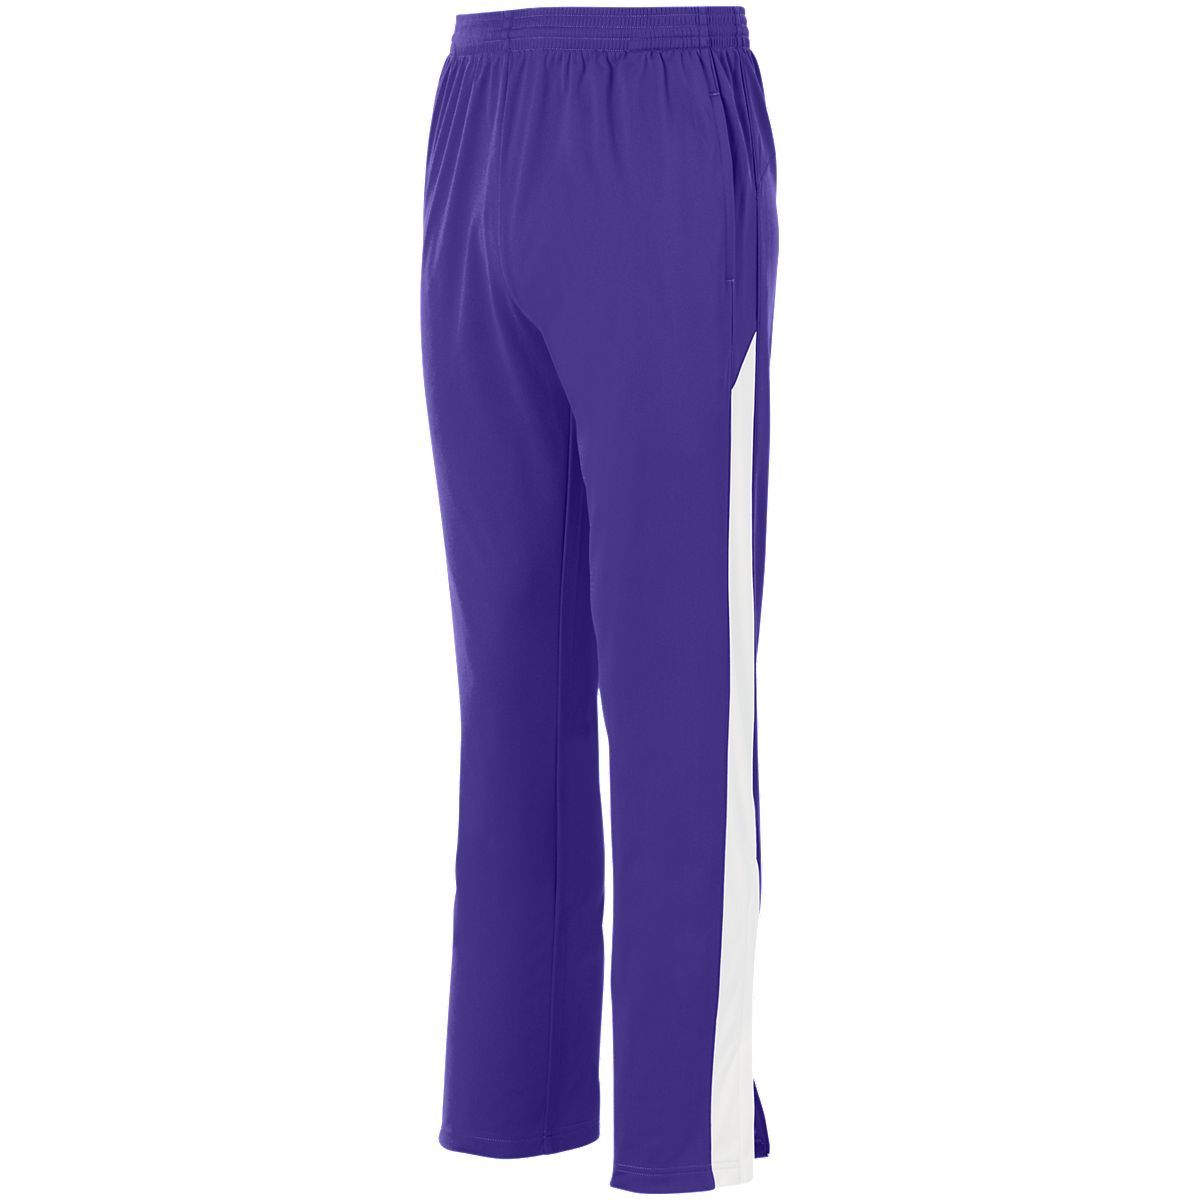 Augusta Sportswear Youth Medalist Pant 2.0 in Purple/White  -Part of the Youth, Youth-Pants, Pants, Augusta-Products product lines at KanaleyCreations.com